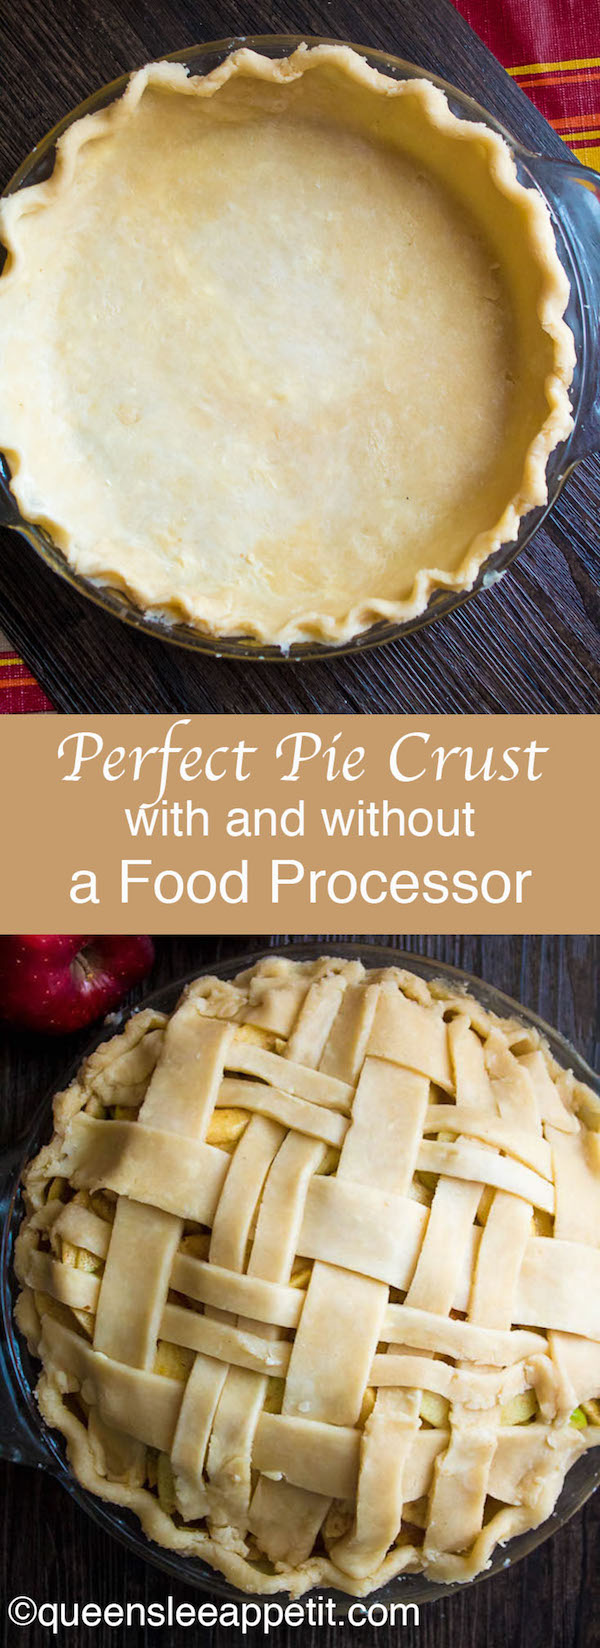 perfect pie crust without food processor